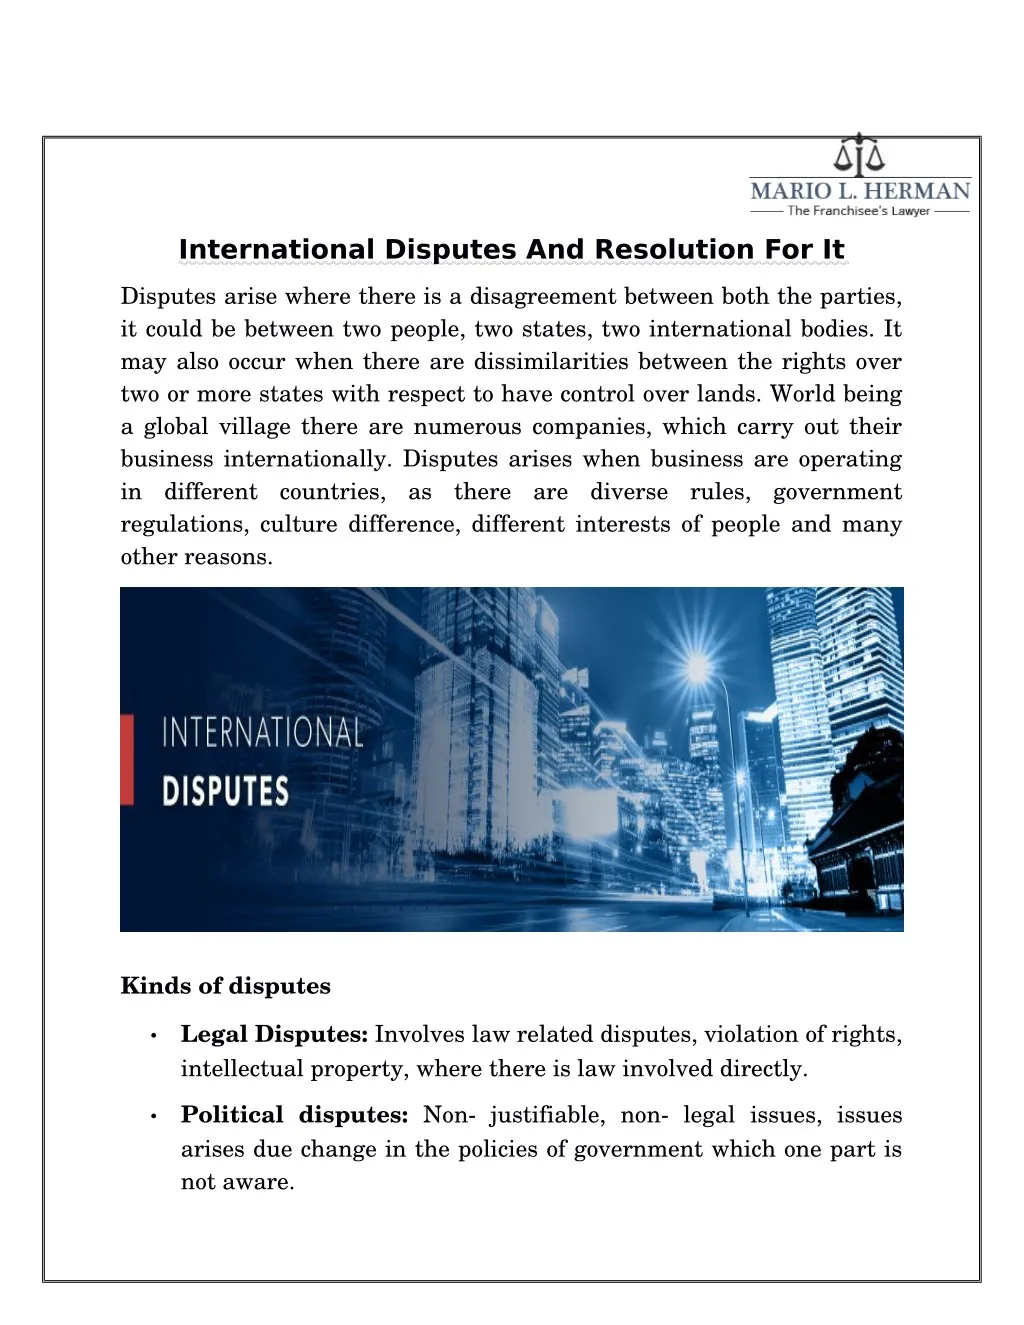 international disputes and resolution for it